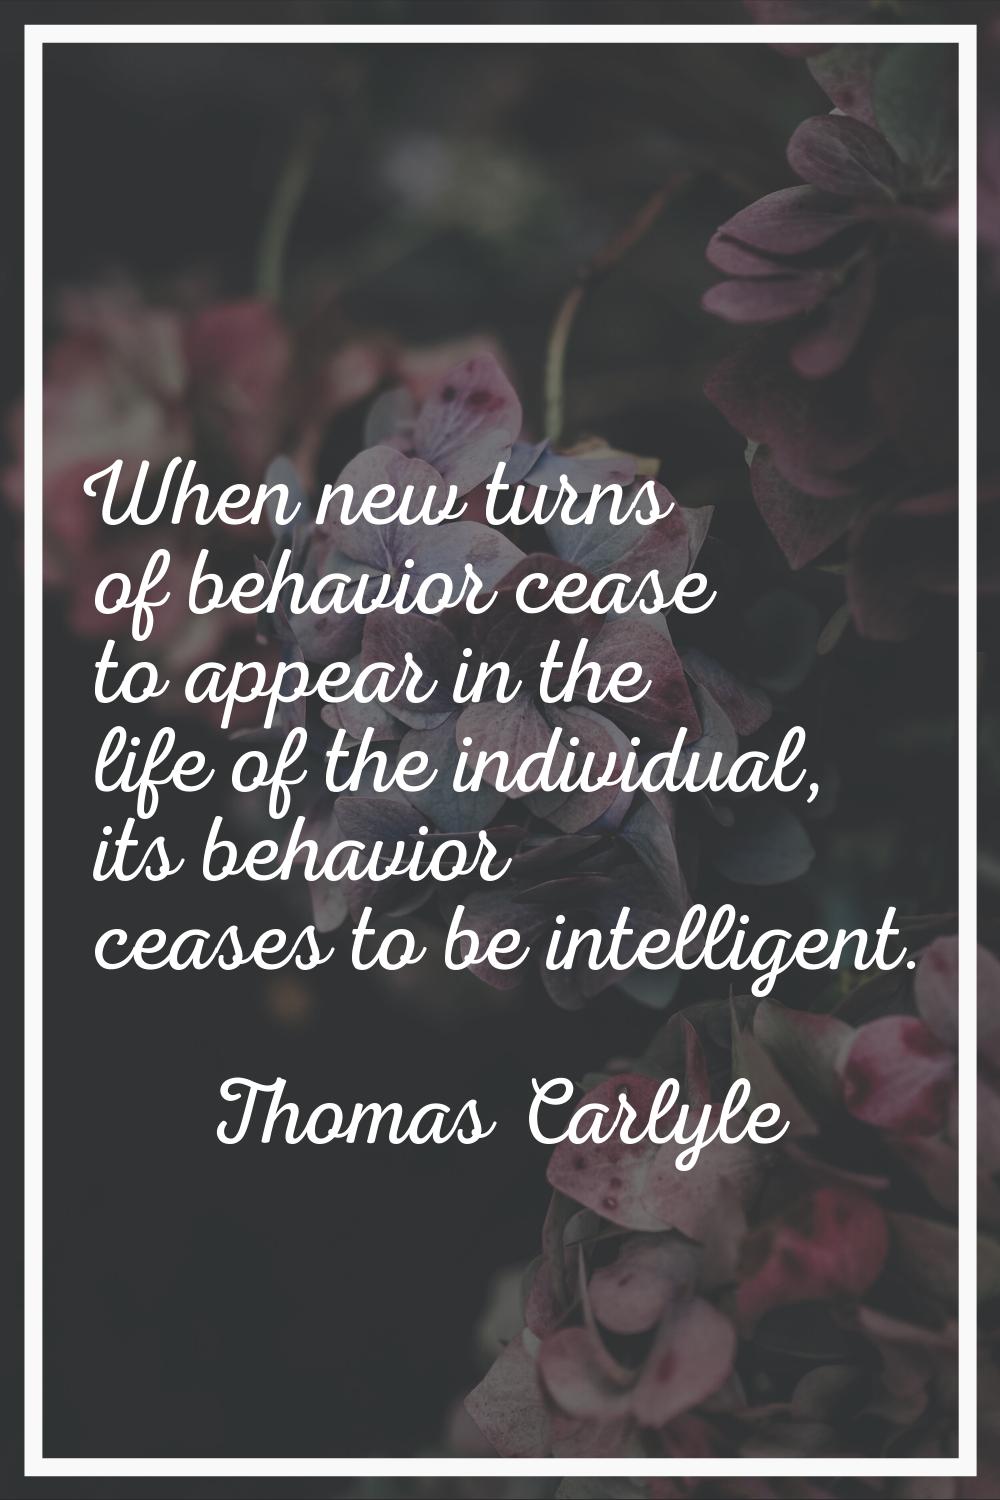 When new turns of behavior cease to appear in the life of the individual, its behavior ceases to be